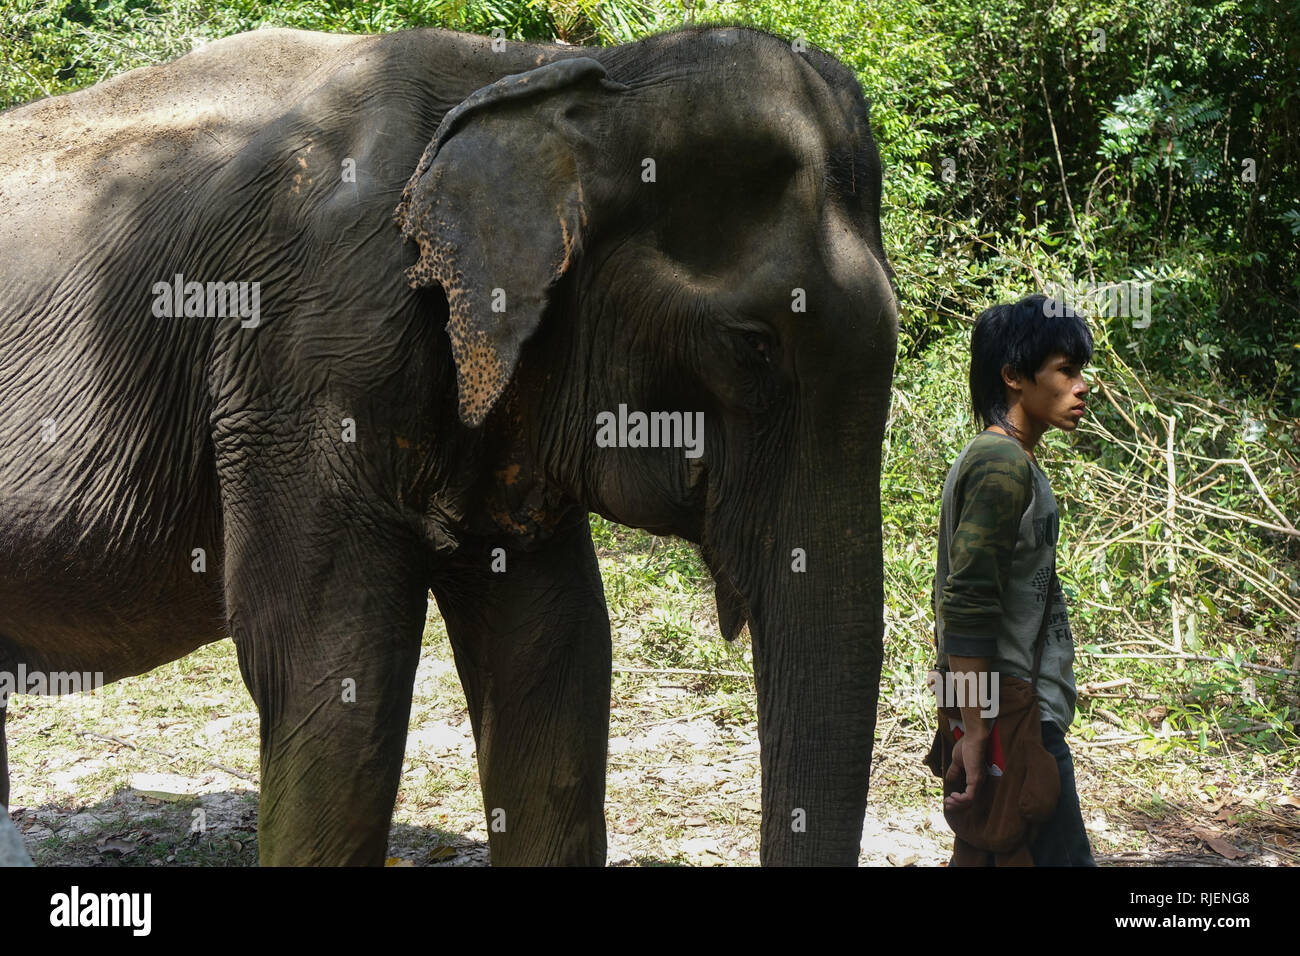 A female Elephant with her carer in 'Elephant Jungle Sanctuary', in Krabi Thailand. Stock Photo